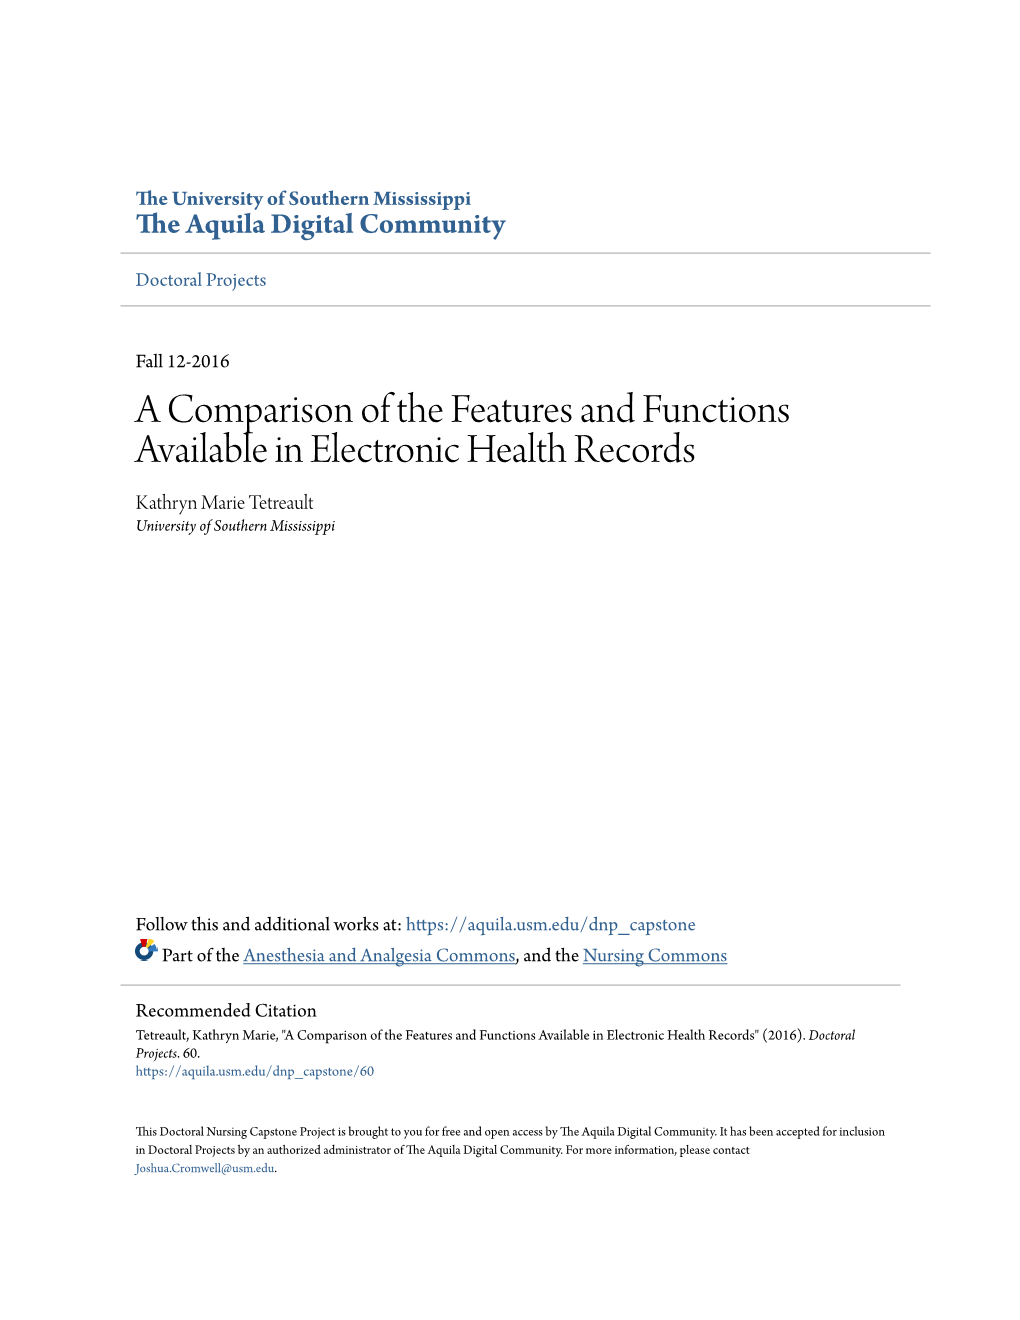 A Comparison of the Features and Functions Available in Electronic Health Records Kathryn Marie Tetreault University of Southern Mississippi